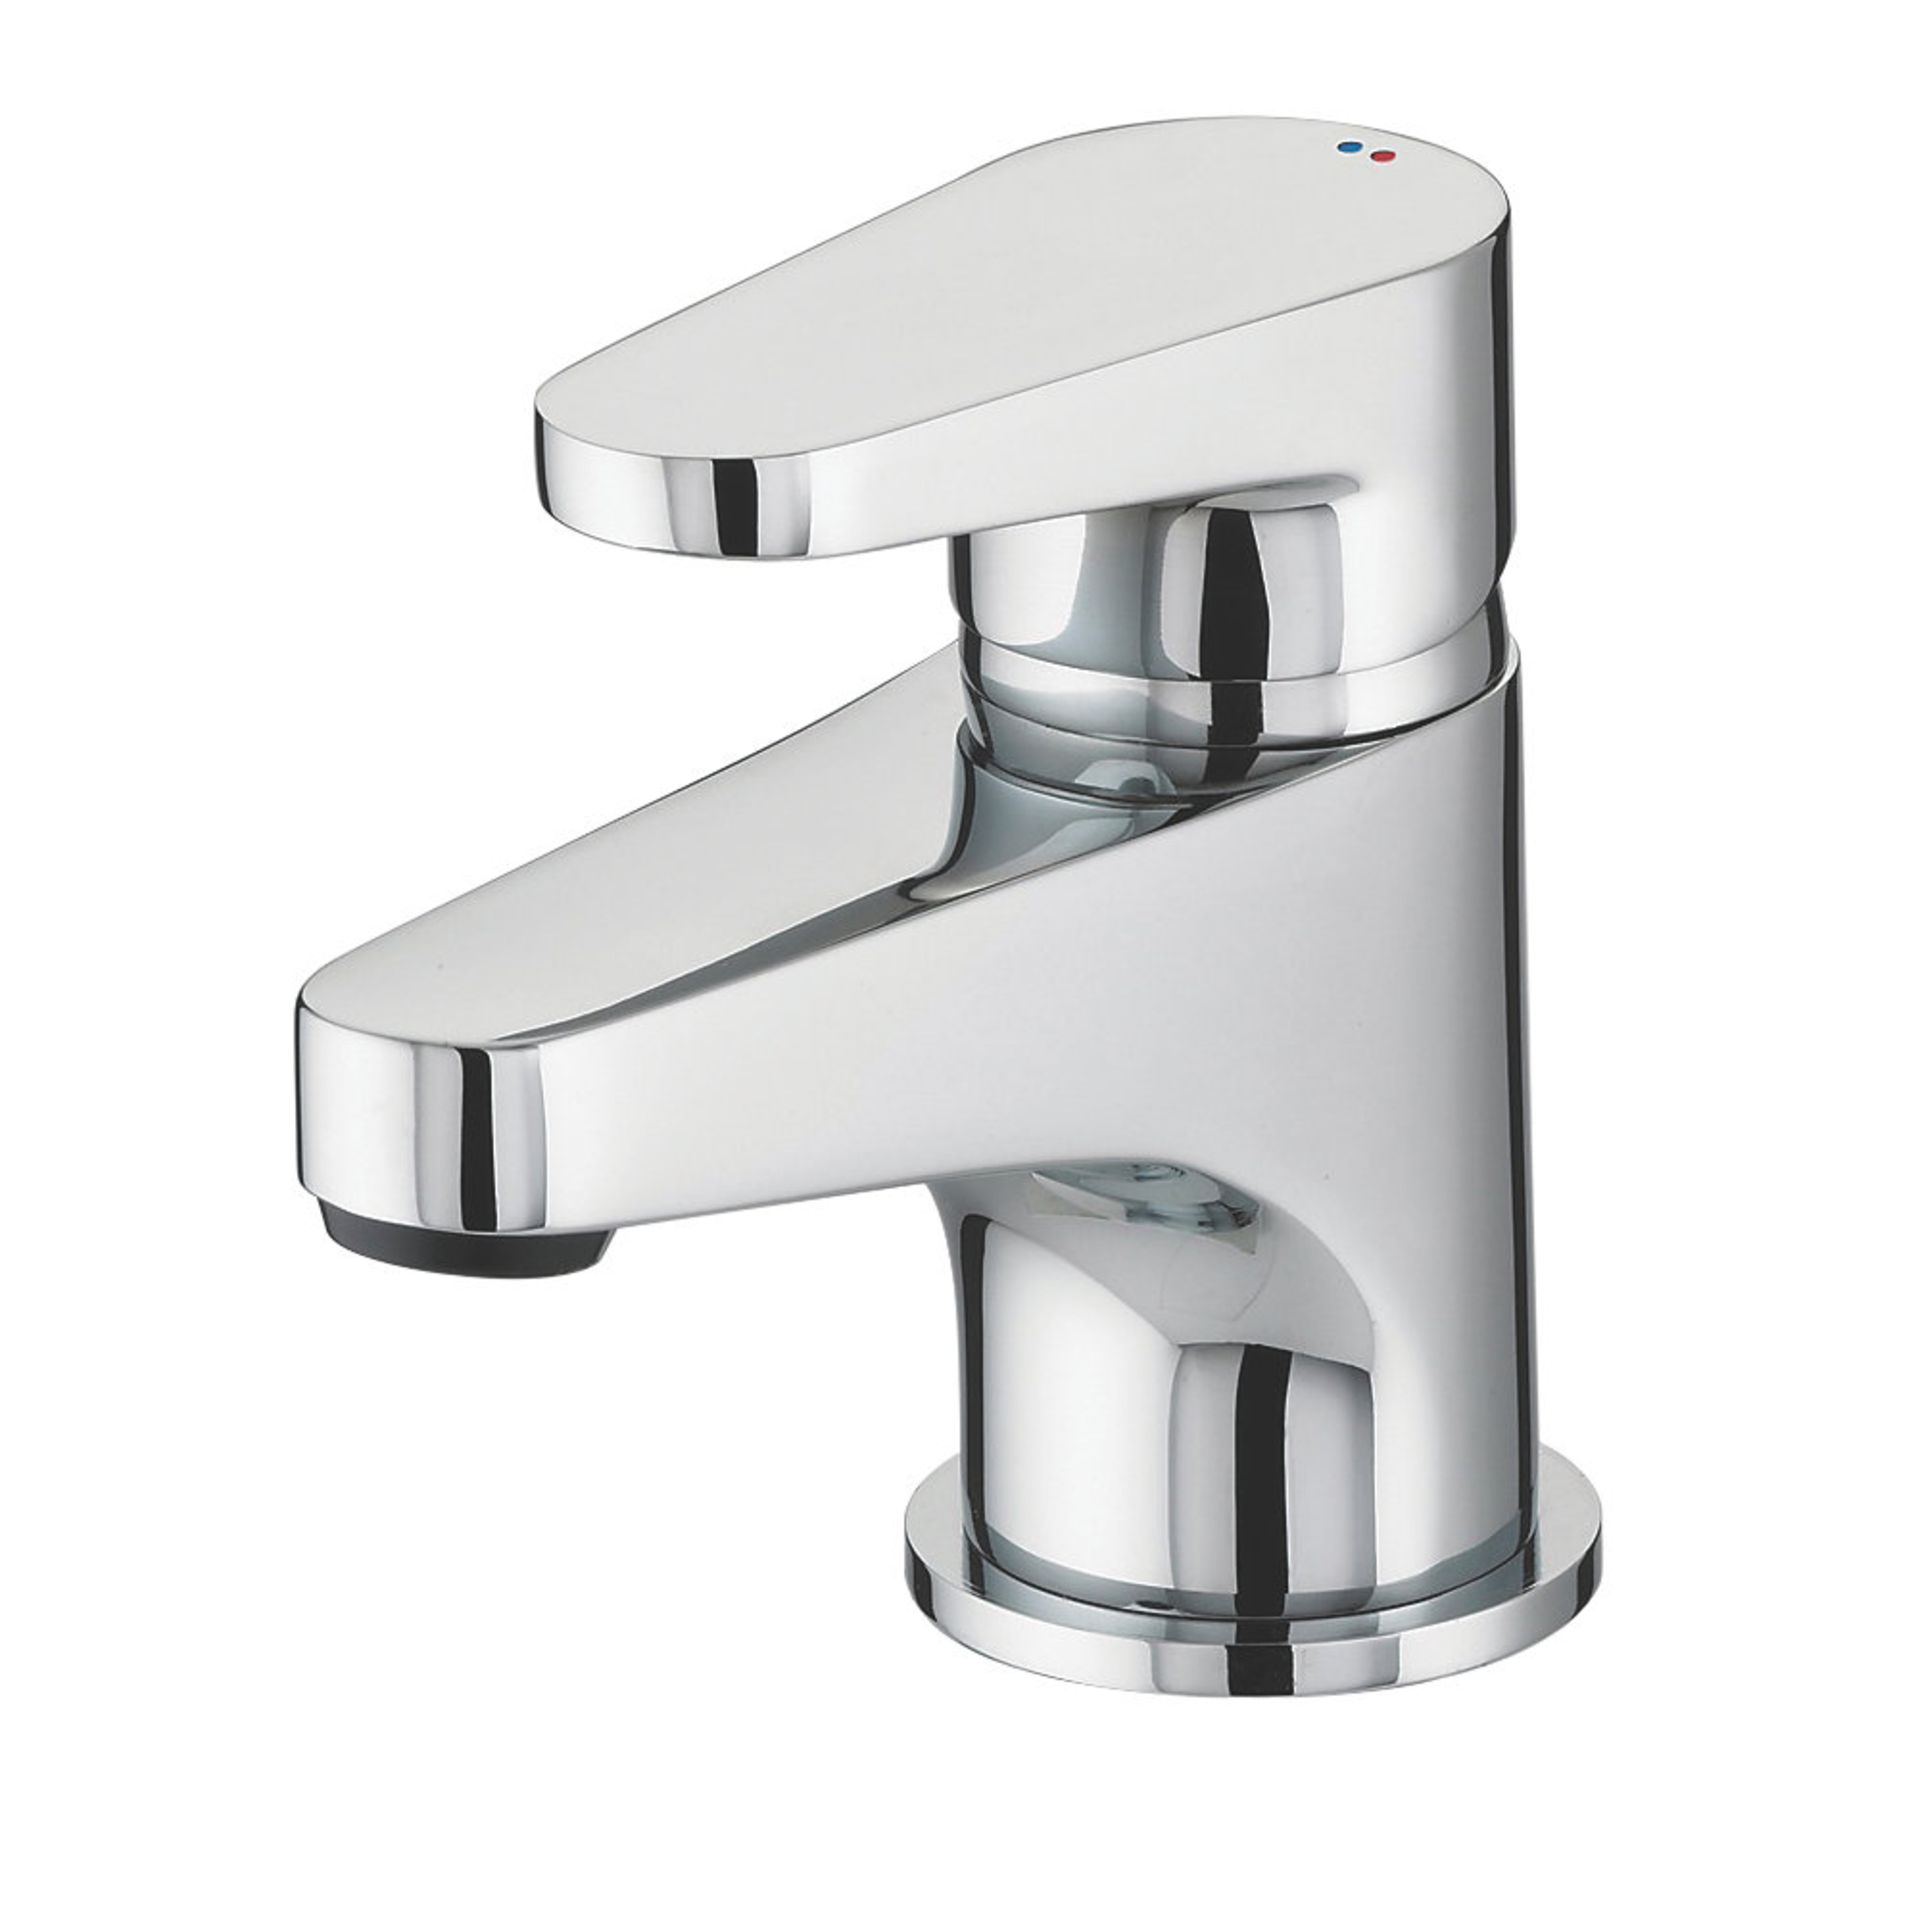 (PP192) Bristan Quest Bathroom Basin Mono Mixer Tap with Click Waste. Chrome-plated brass. - Image 2 of 4